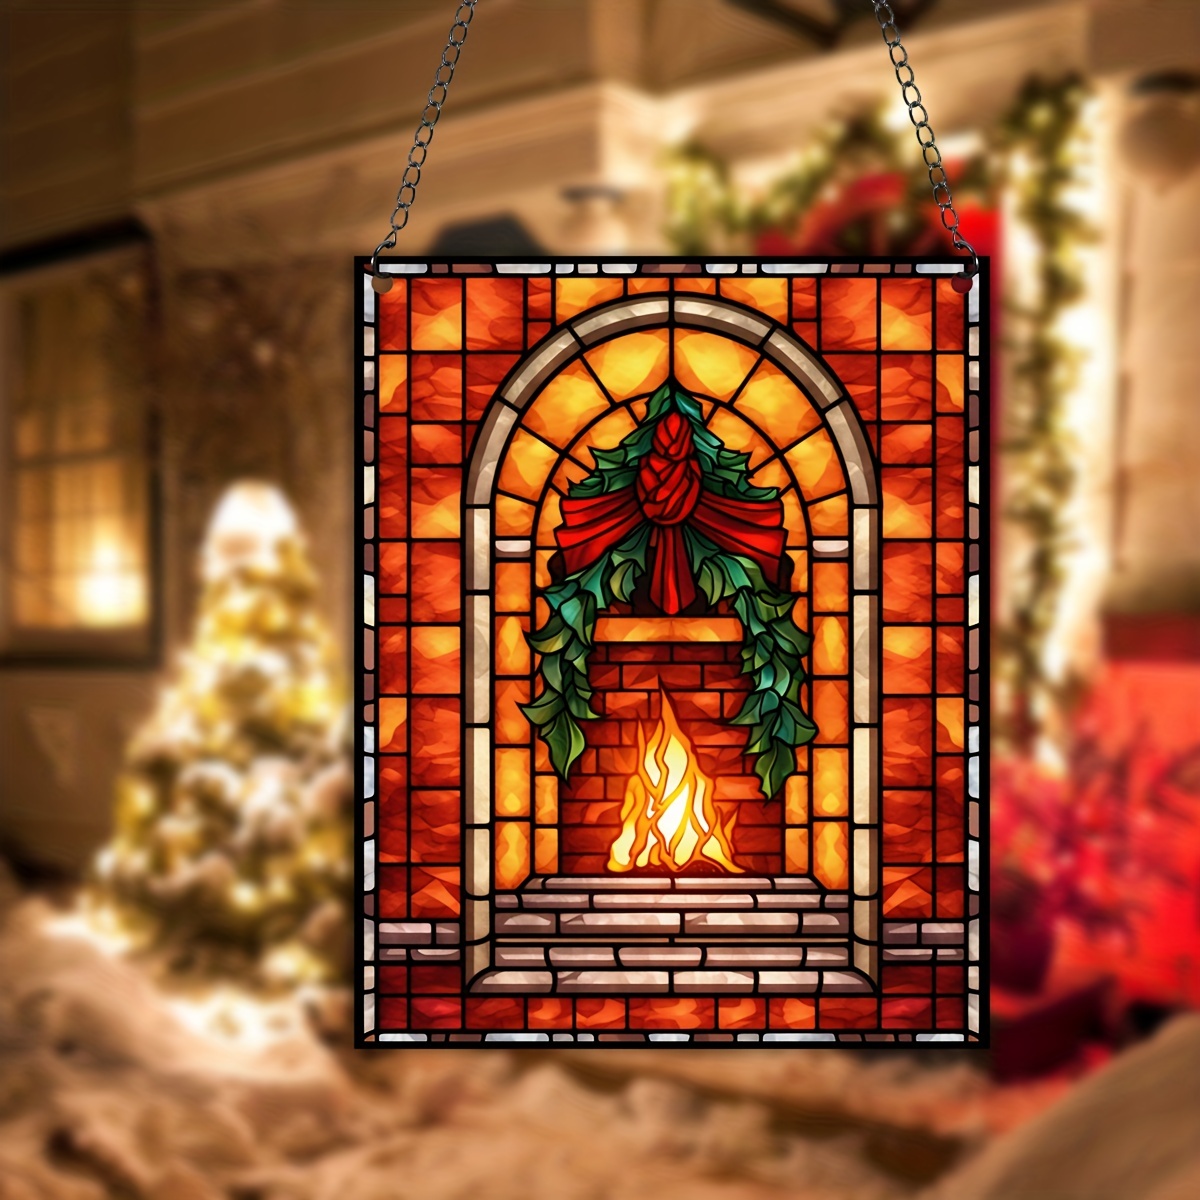 Christmas Truck Magnetic Fireplace Cover 36x30, Decorative Fireplace  Blanket Insulation Cover for Heat Loss, Indoor Outdoor Fireplace Draft  Stopper